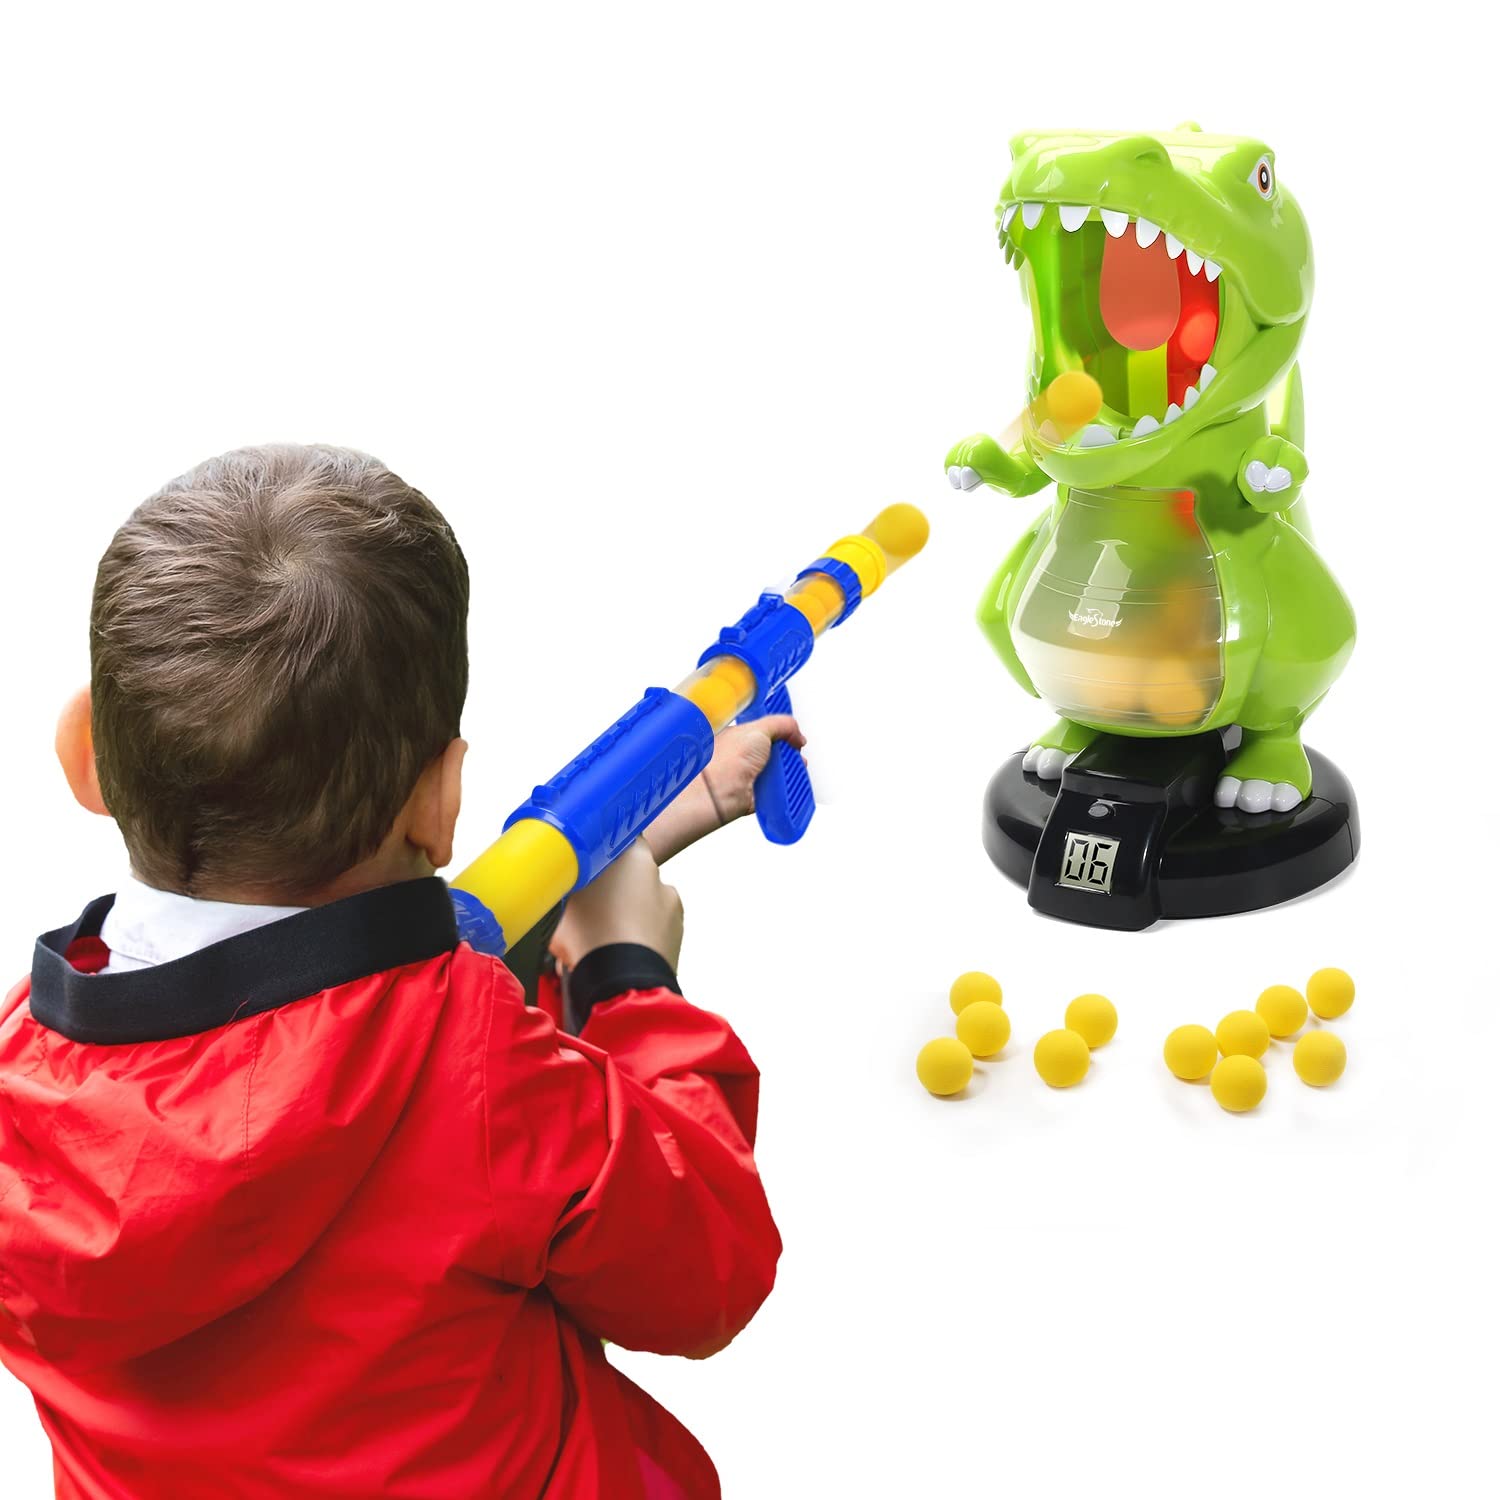 EagleStone Dinosaur Shooting Toys for Boys, Kids Target Shooting Games w/ Air Pump Gun Birthday Party Supplies & LCD Score Record, Sound, 24 Foam Balls Electronic Target Practice Gift for Toddlers